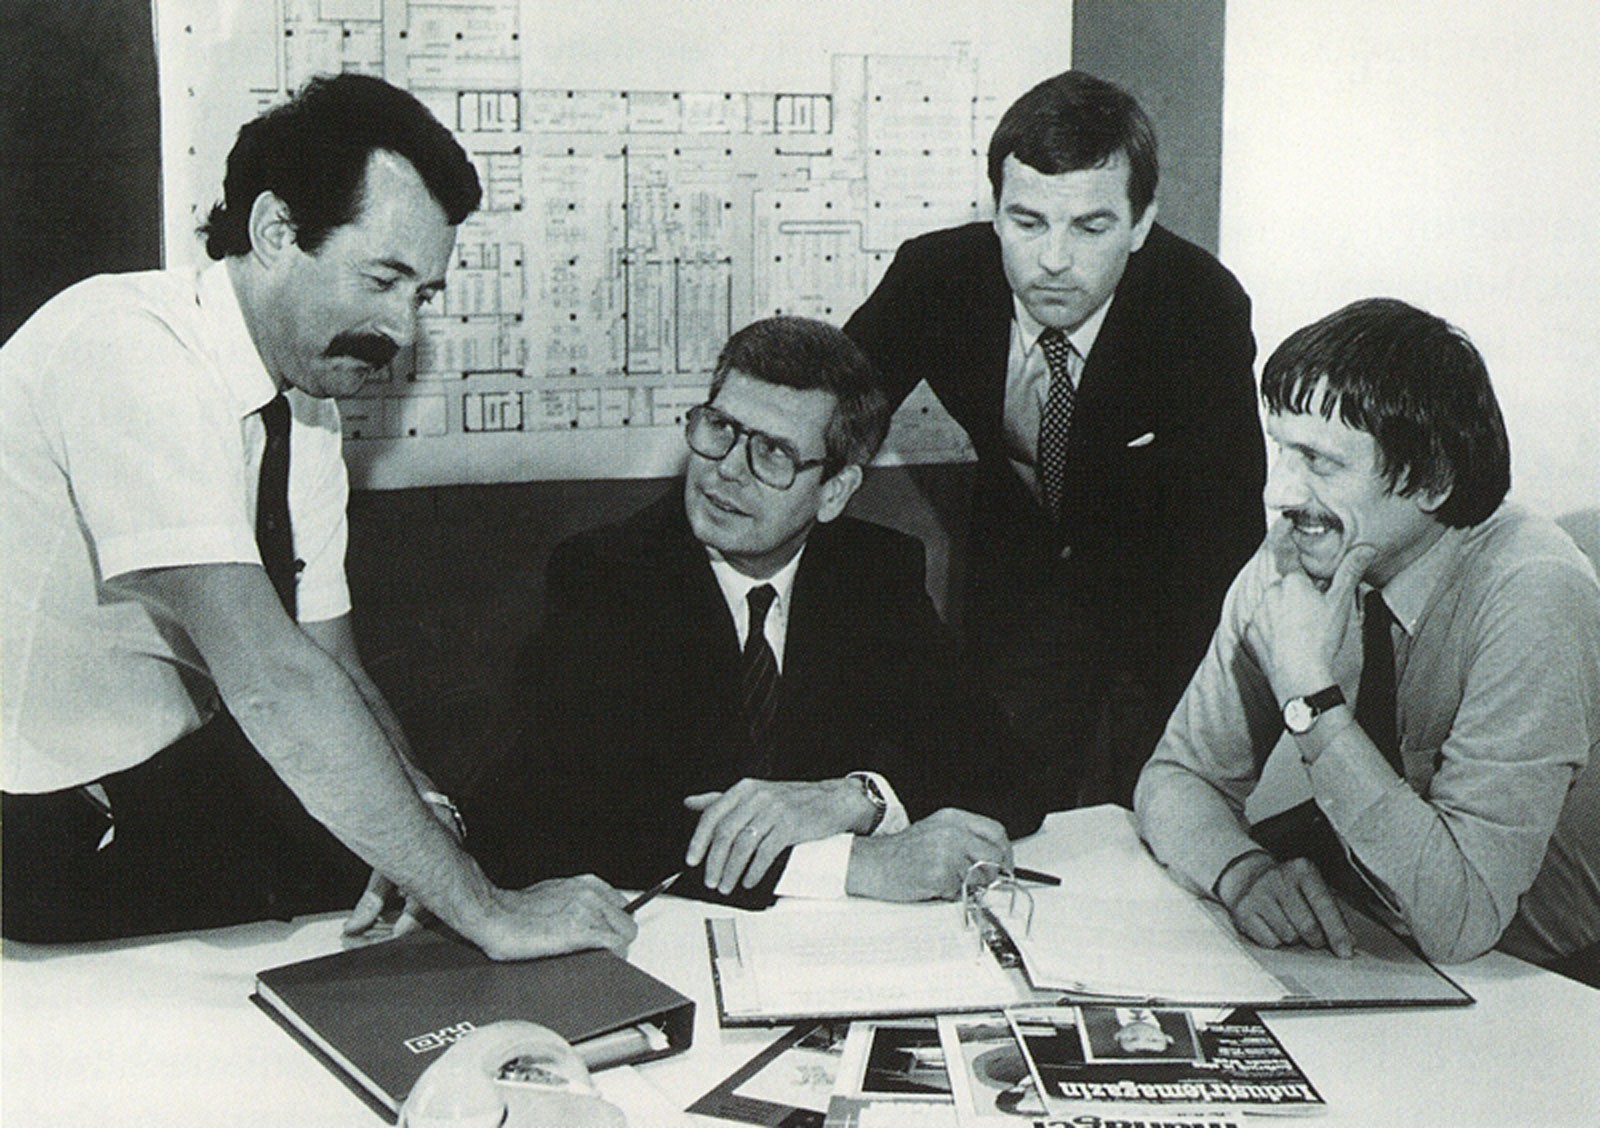 Black and white picture of an architect's meeting